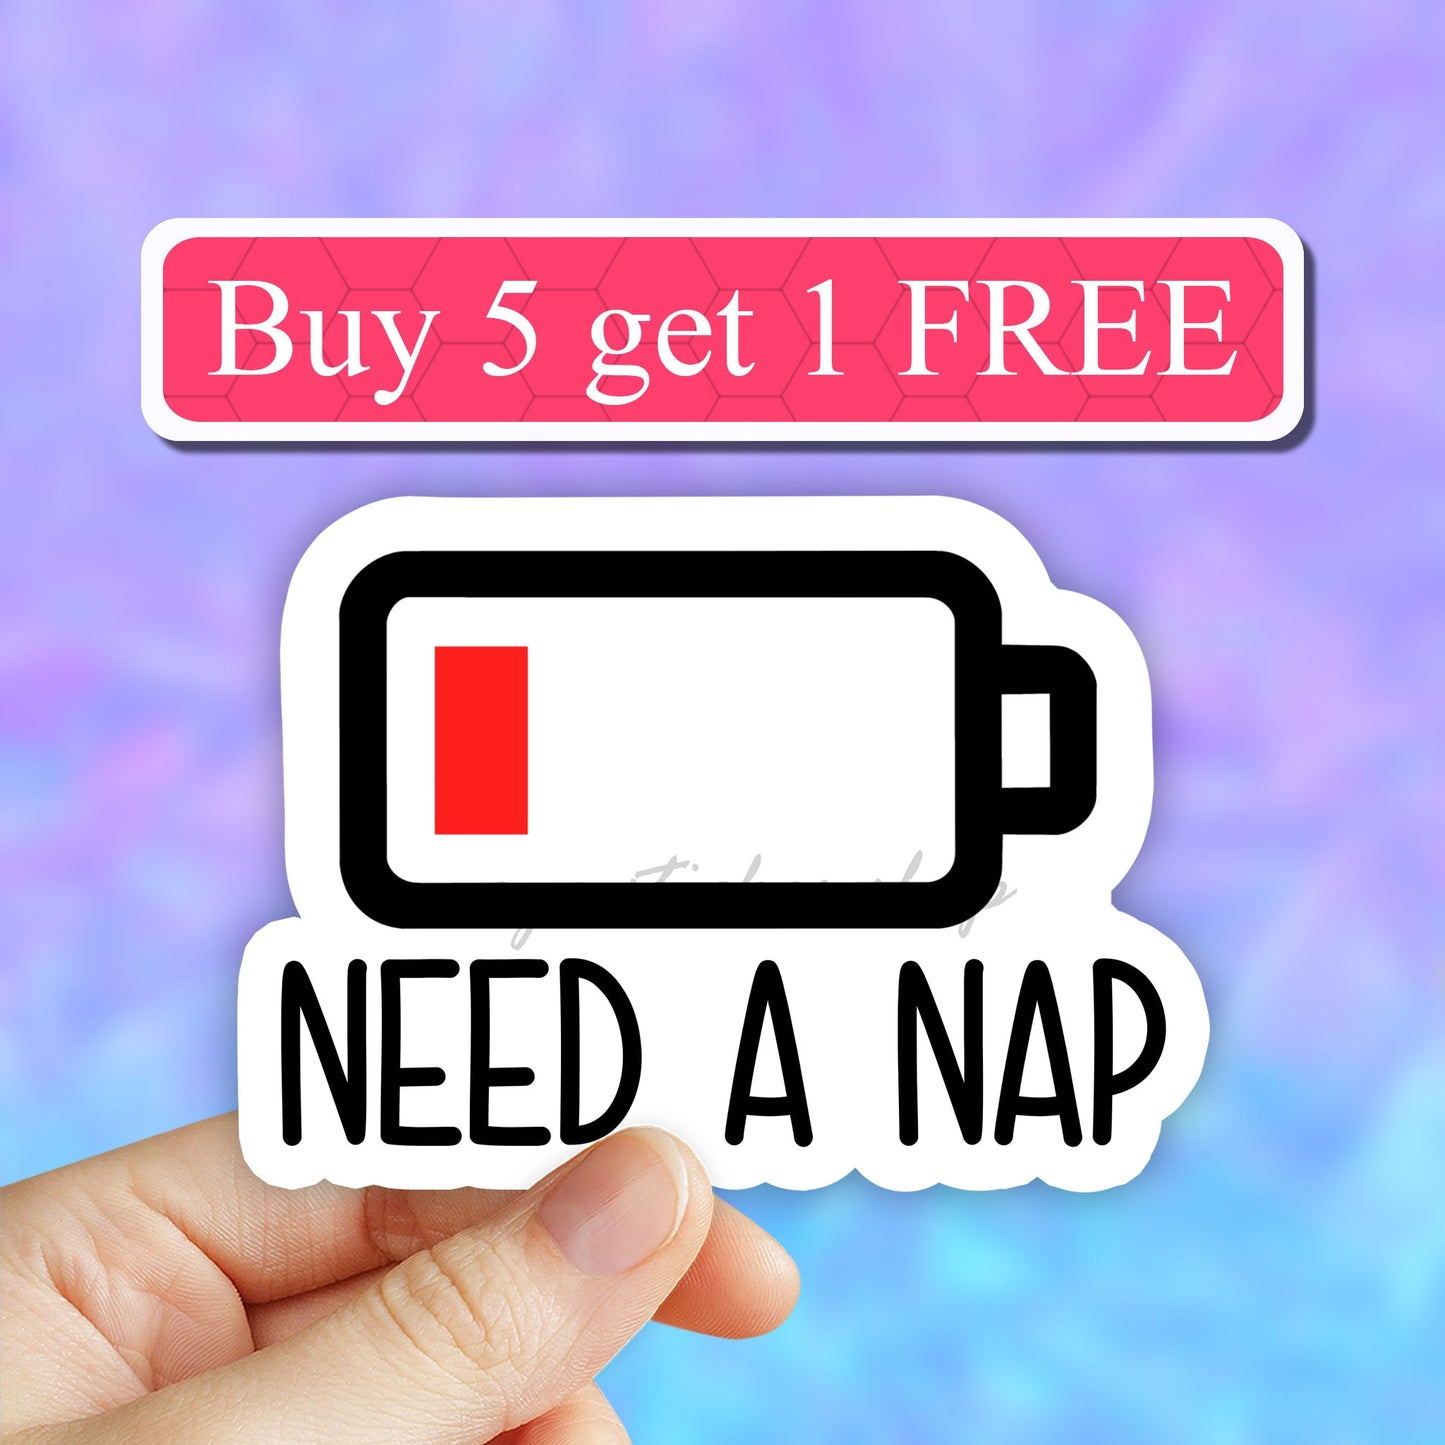 Need a nap battery sticker, funny battery stickers, funny nap stickers for tumbler and laptops, nap sticker decals I need a nap low battery